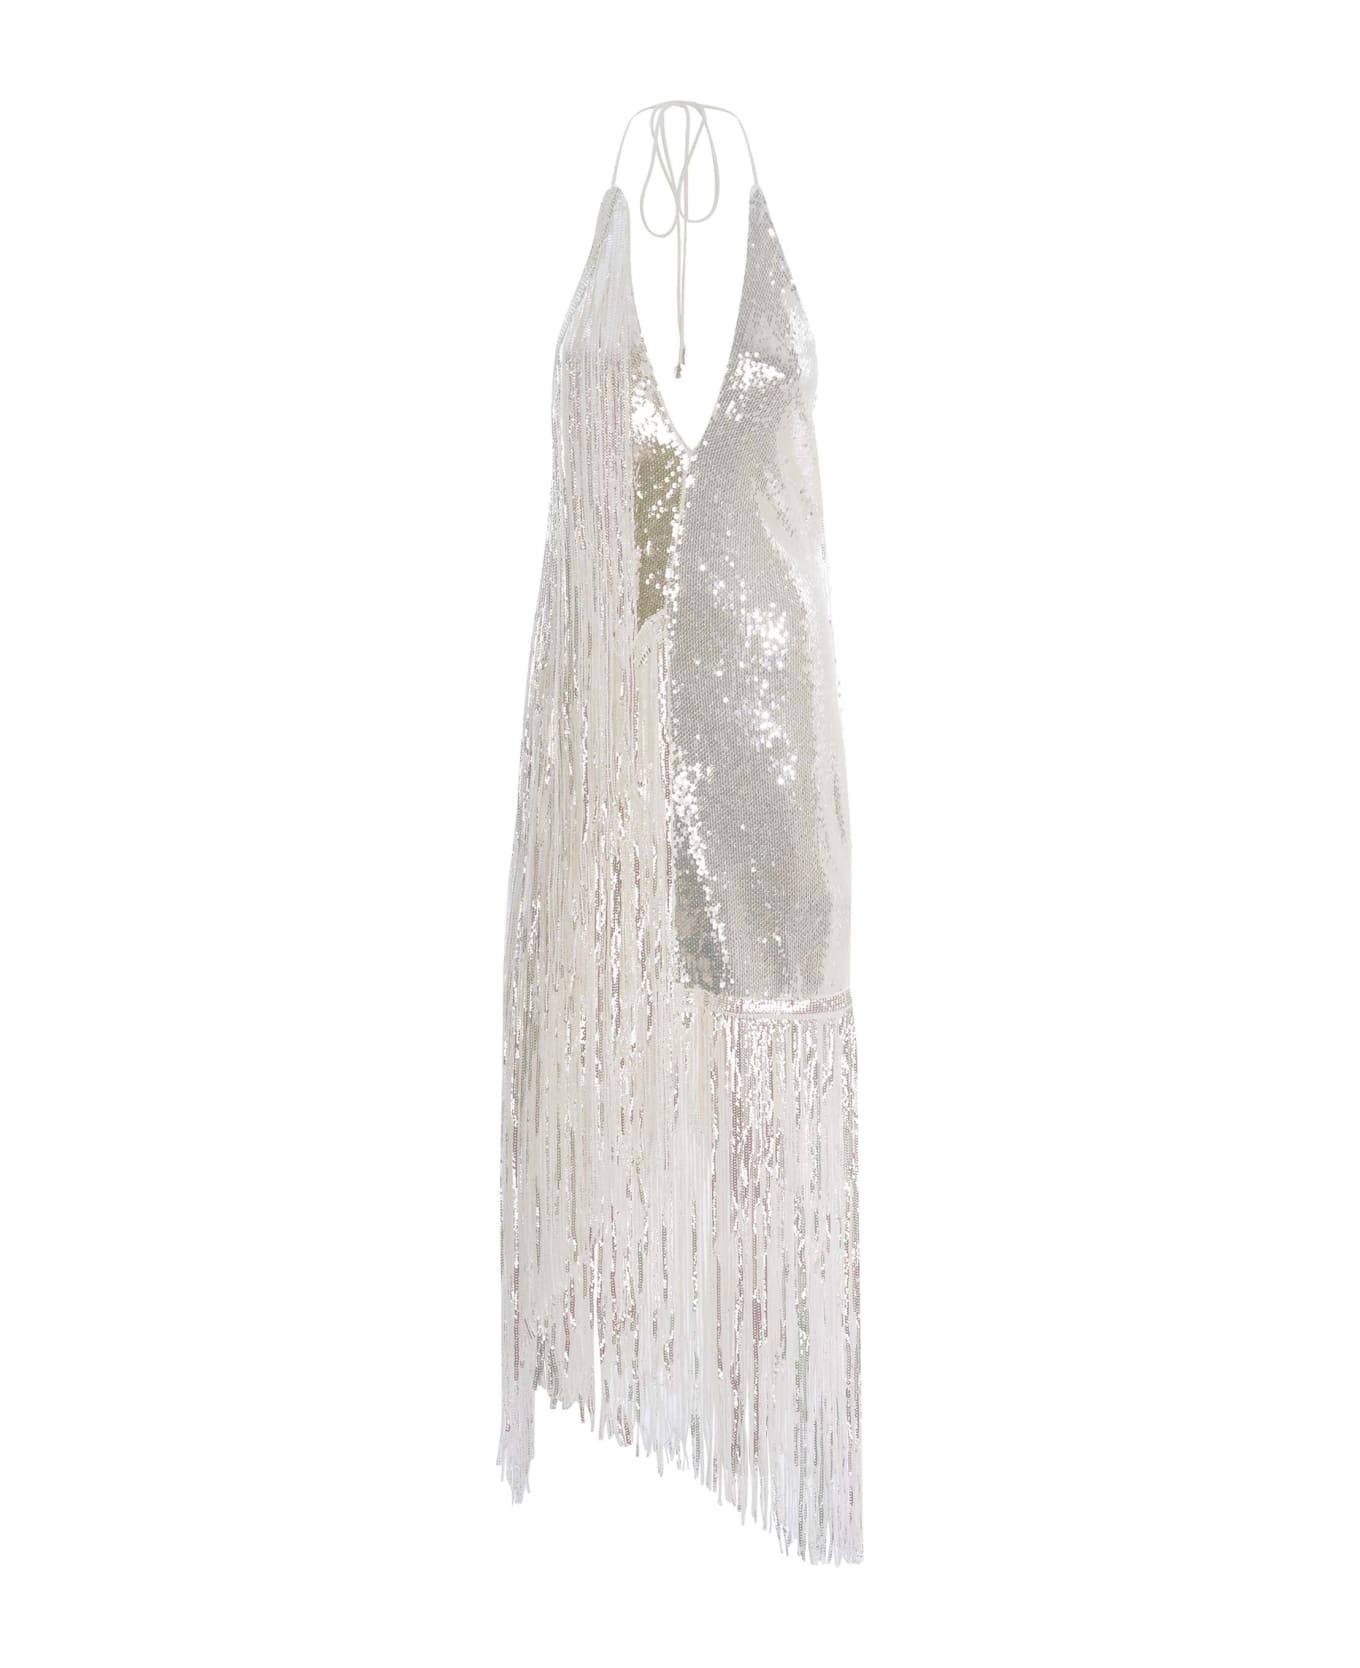 Rotate by Birger Christensen Dress Rotate Made With Fringes And Sequins - Bianco